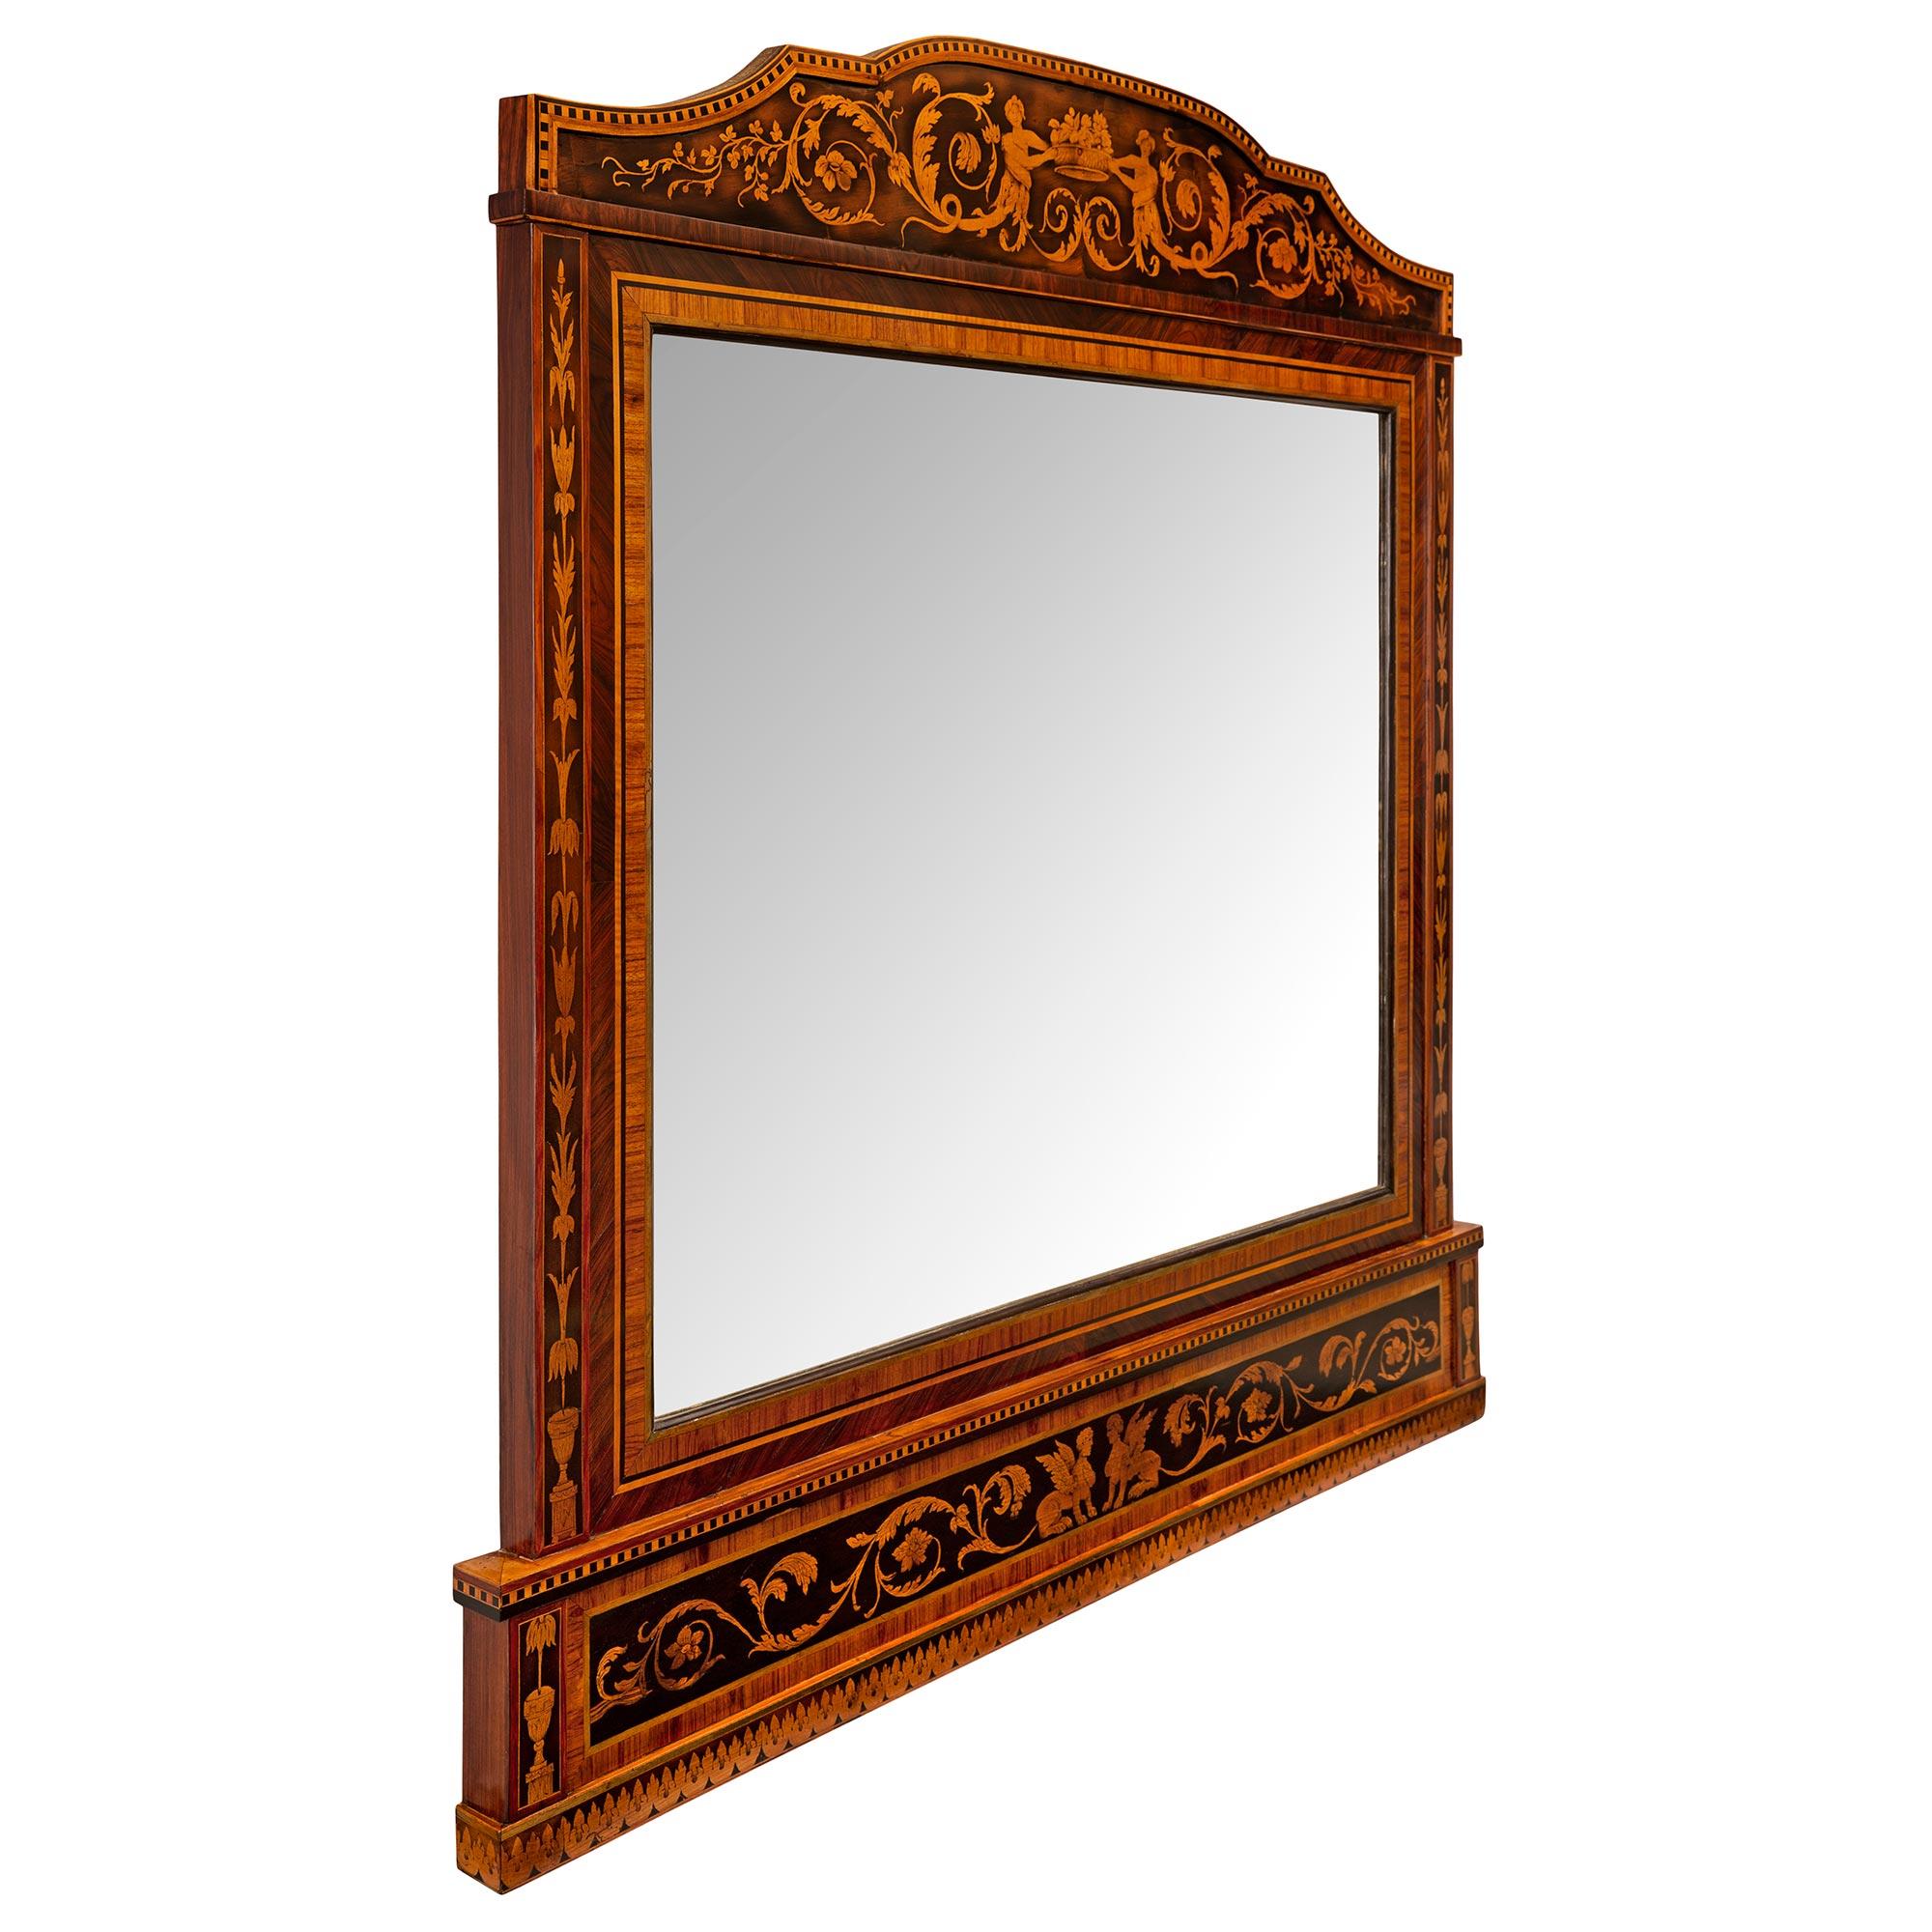 A beautiful Italian early 19th century Neo-Classical st. Kingwood, Tulipwood, and ebonized Fruitwood mirror in the manner of Giuseppe Maggiolini. The mirror retains its original mirror plate set within a fine mottled border. The base of the mirror